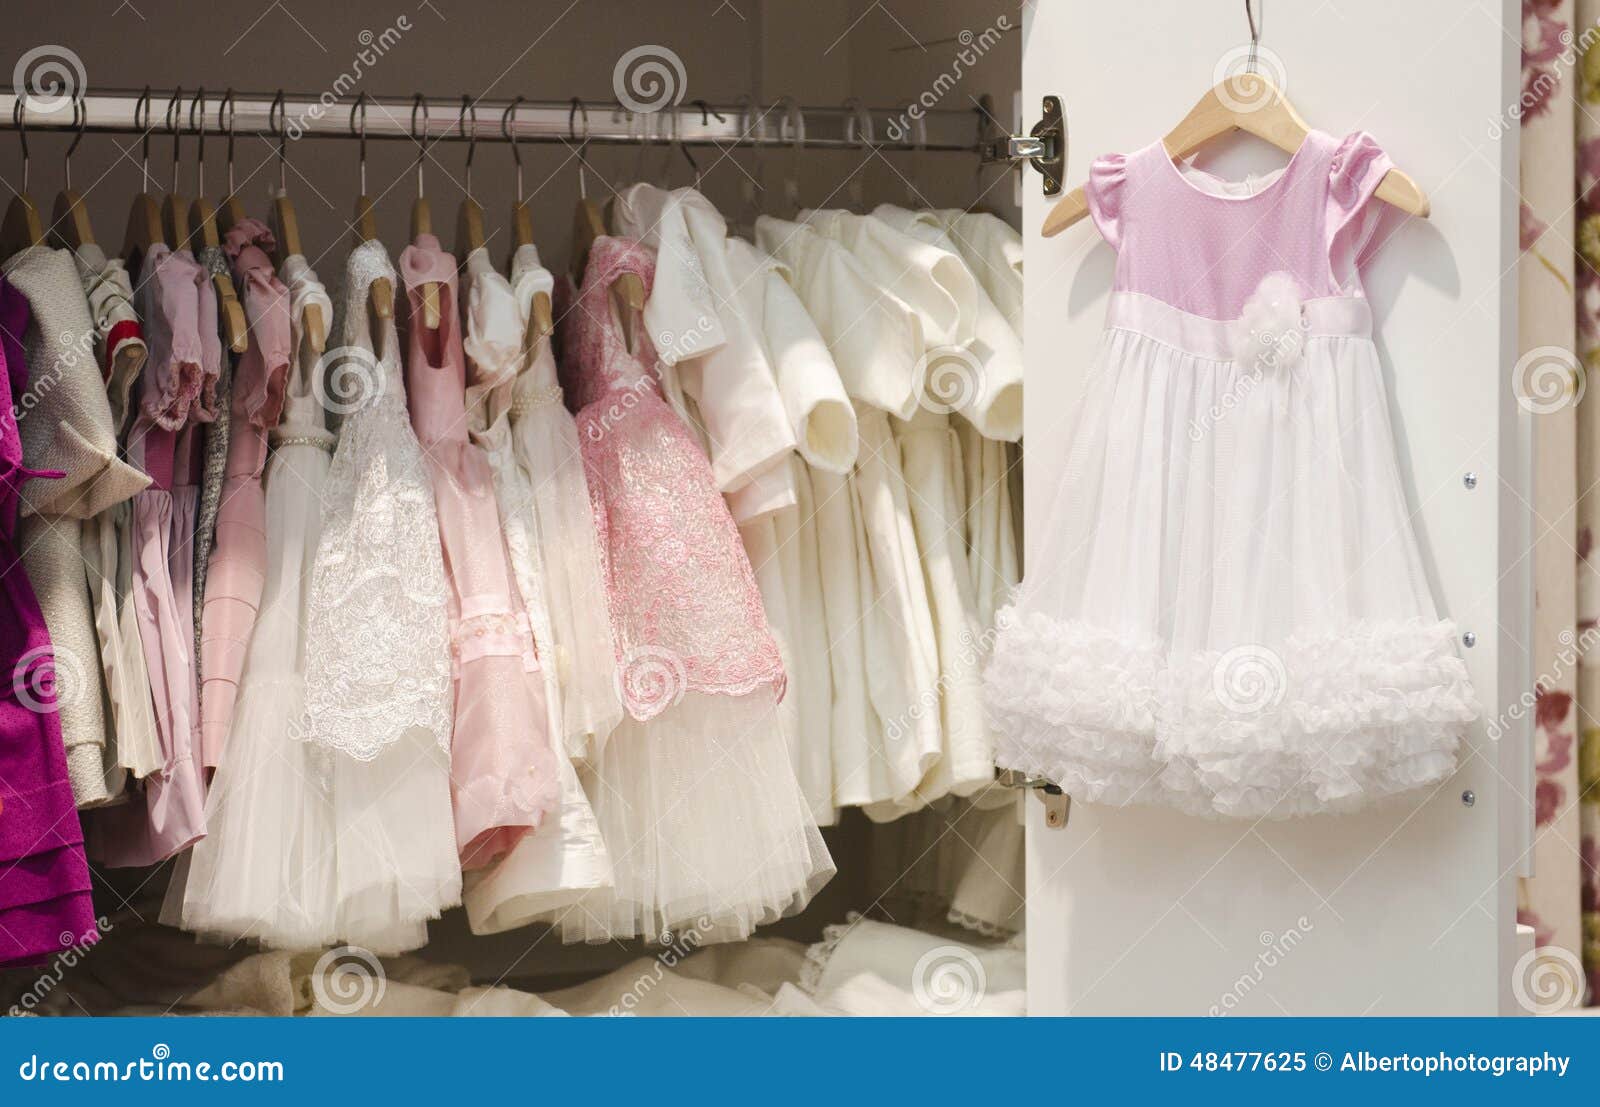 Children clothing store stock image. Image of green, cute - 48477625